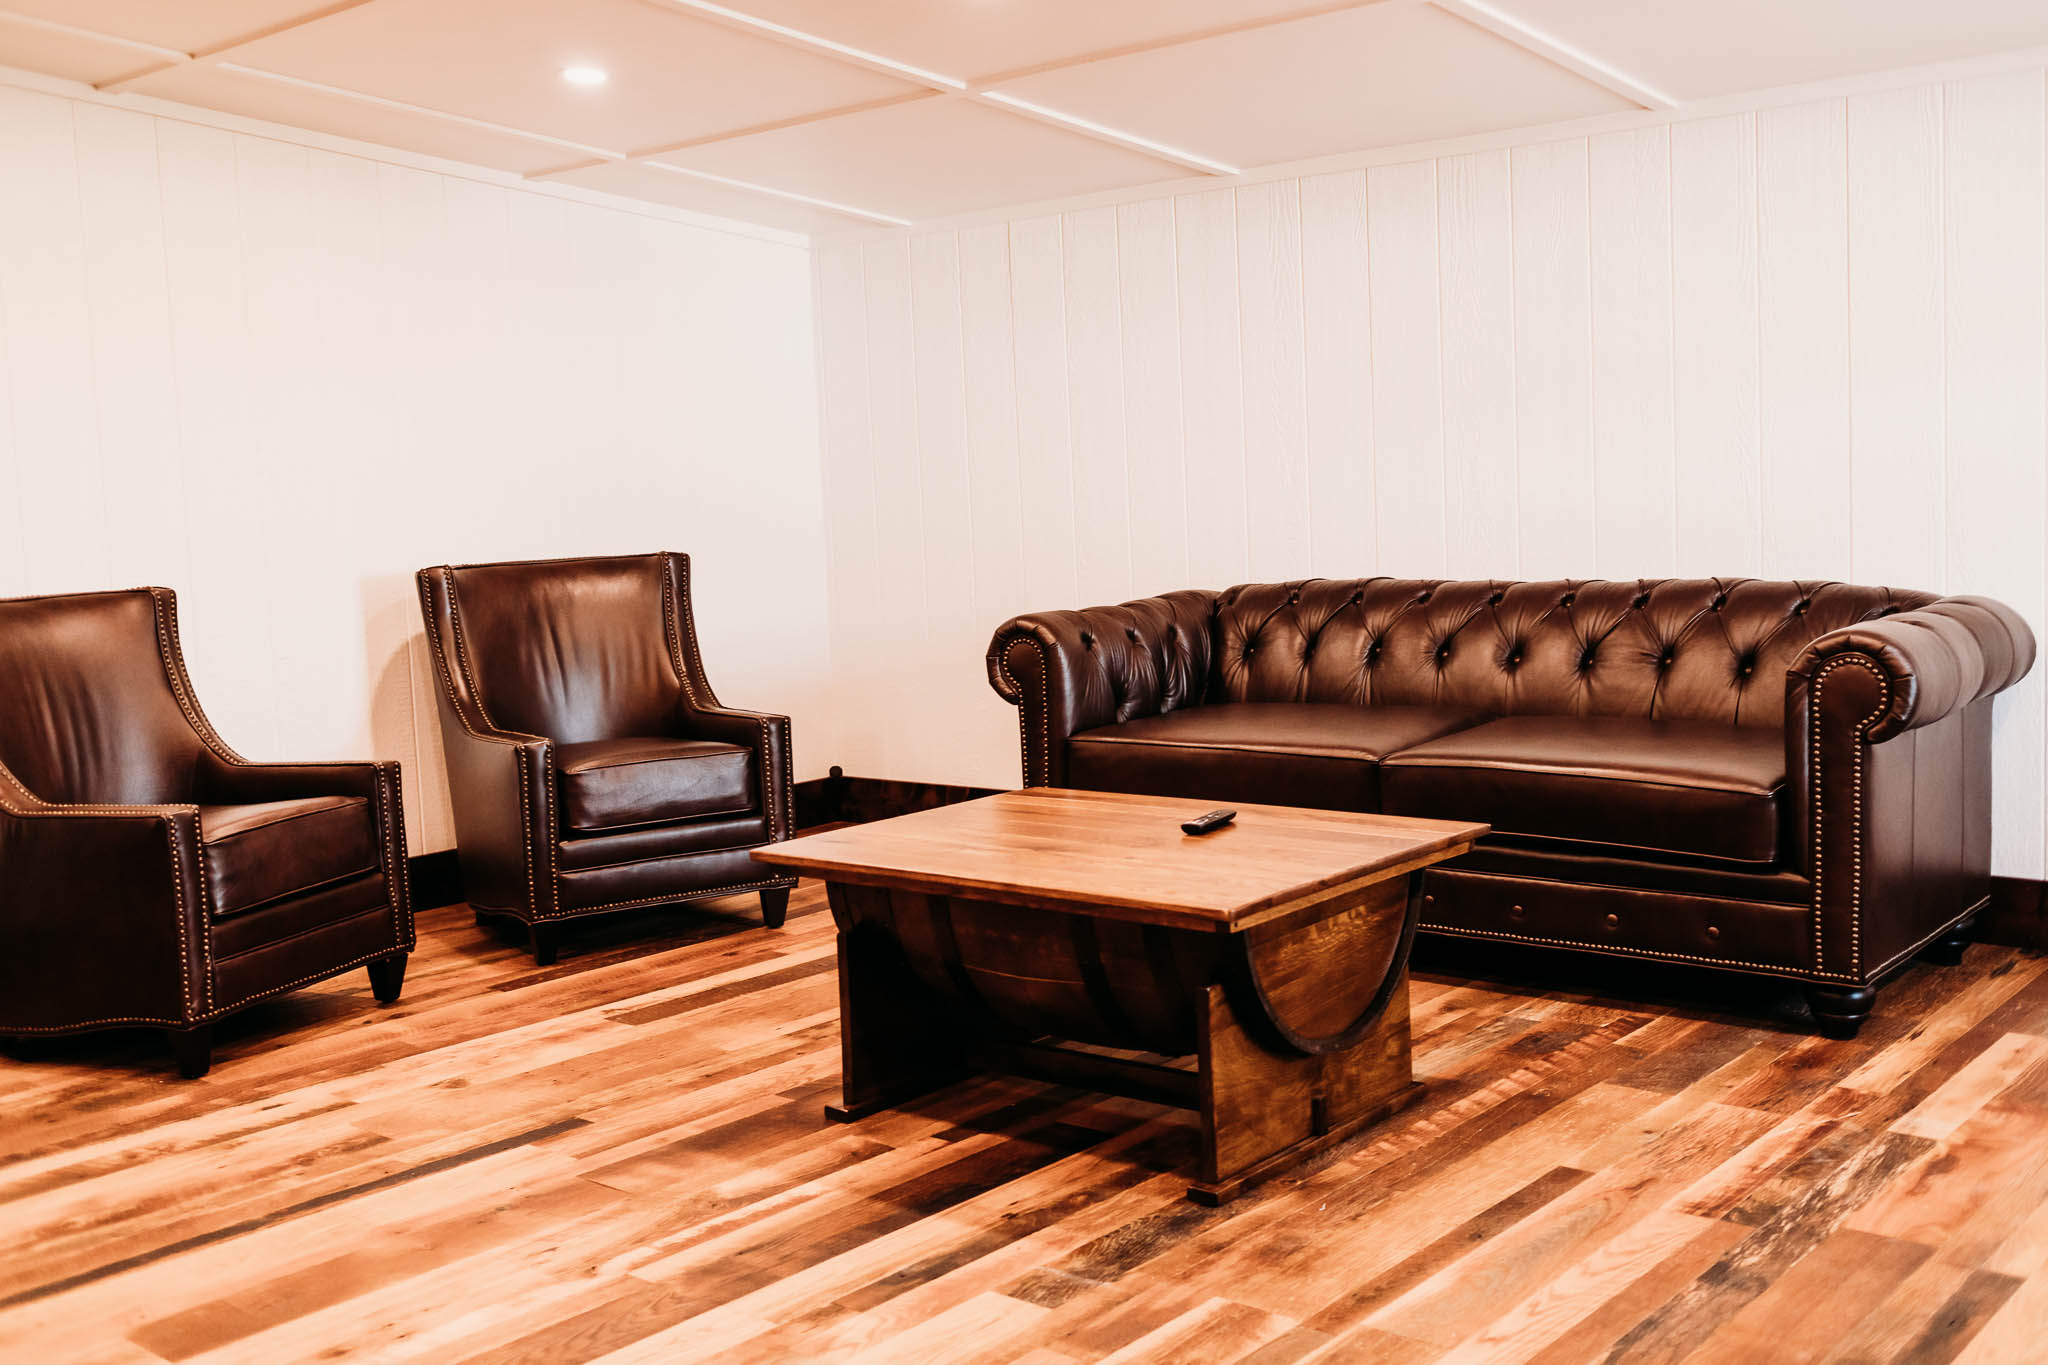 Groom's private getting ready suite at The VeNue Event Space includes a brown leather sofa, two brown leather chair and a handmade reclaimed oak wood coffee table.